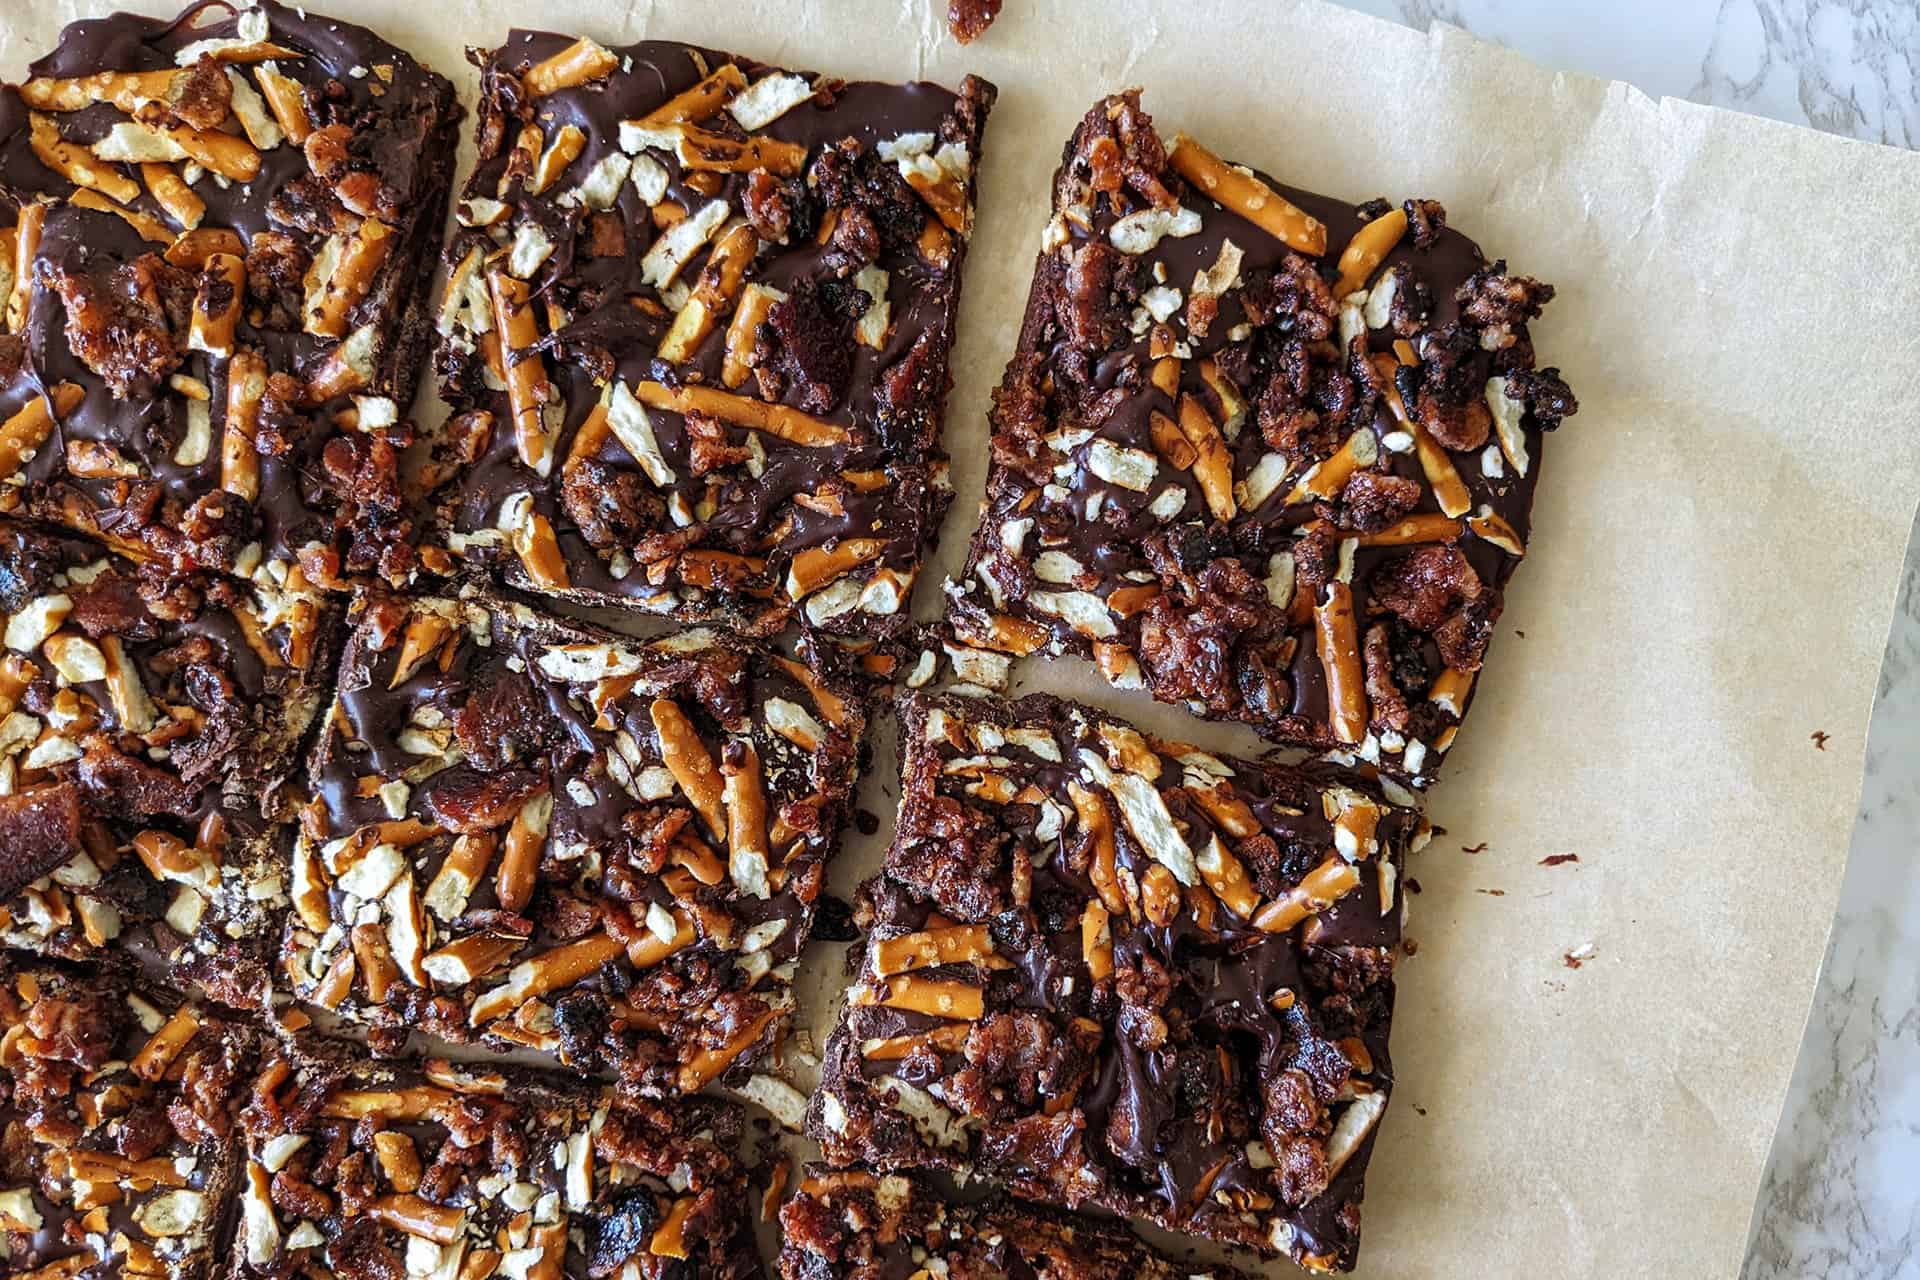 Chocolate pretzel bark topped with candied bacon